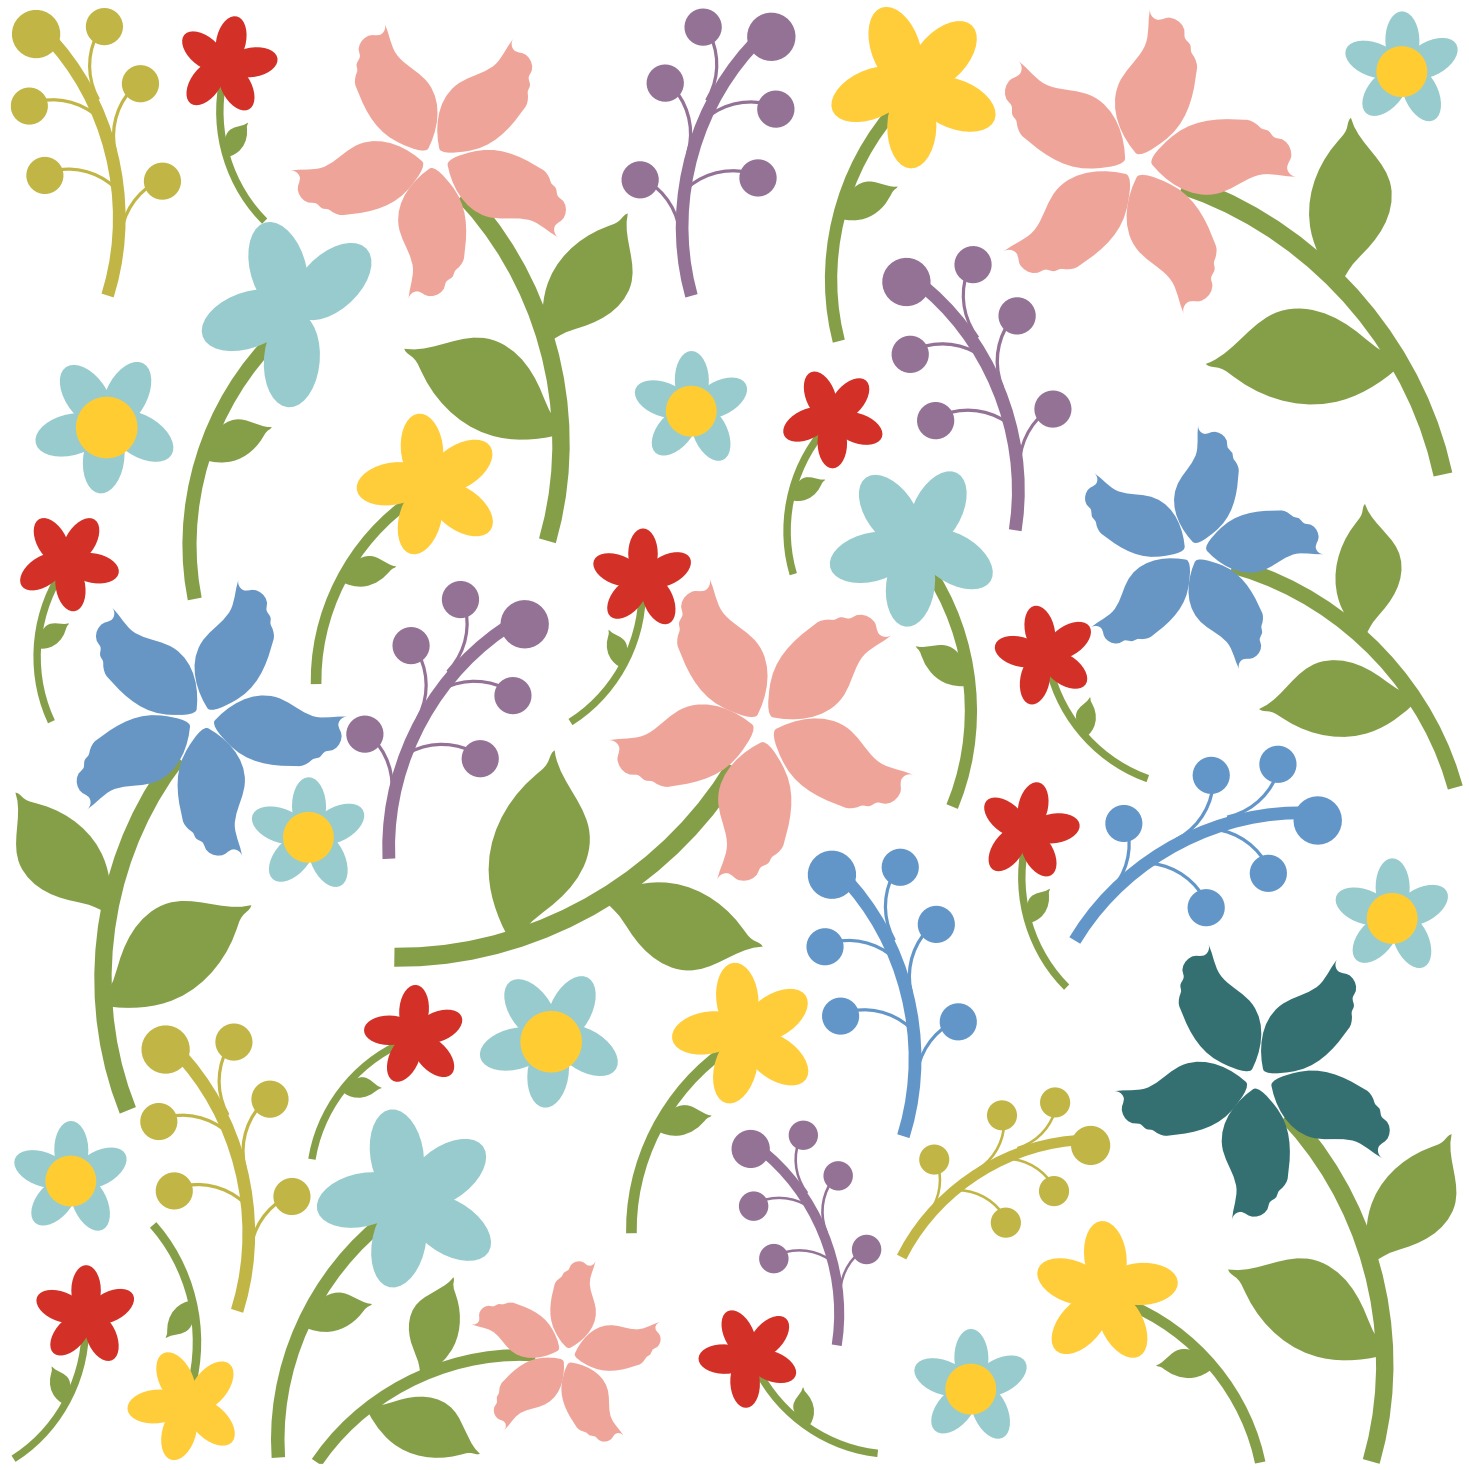 Download Seamless Floral Background Vector 86576 - Download Free Vectors, Clipart Graphics & Vector Art